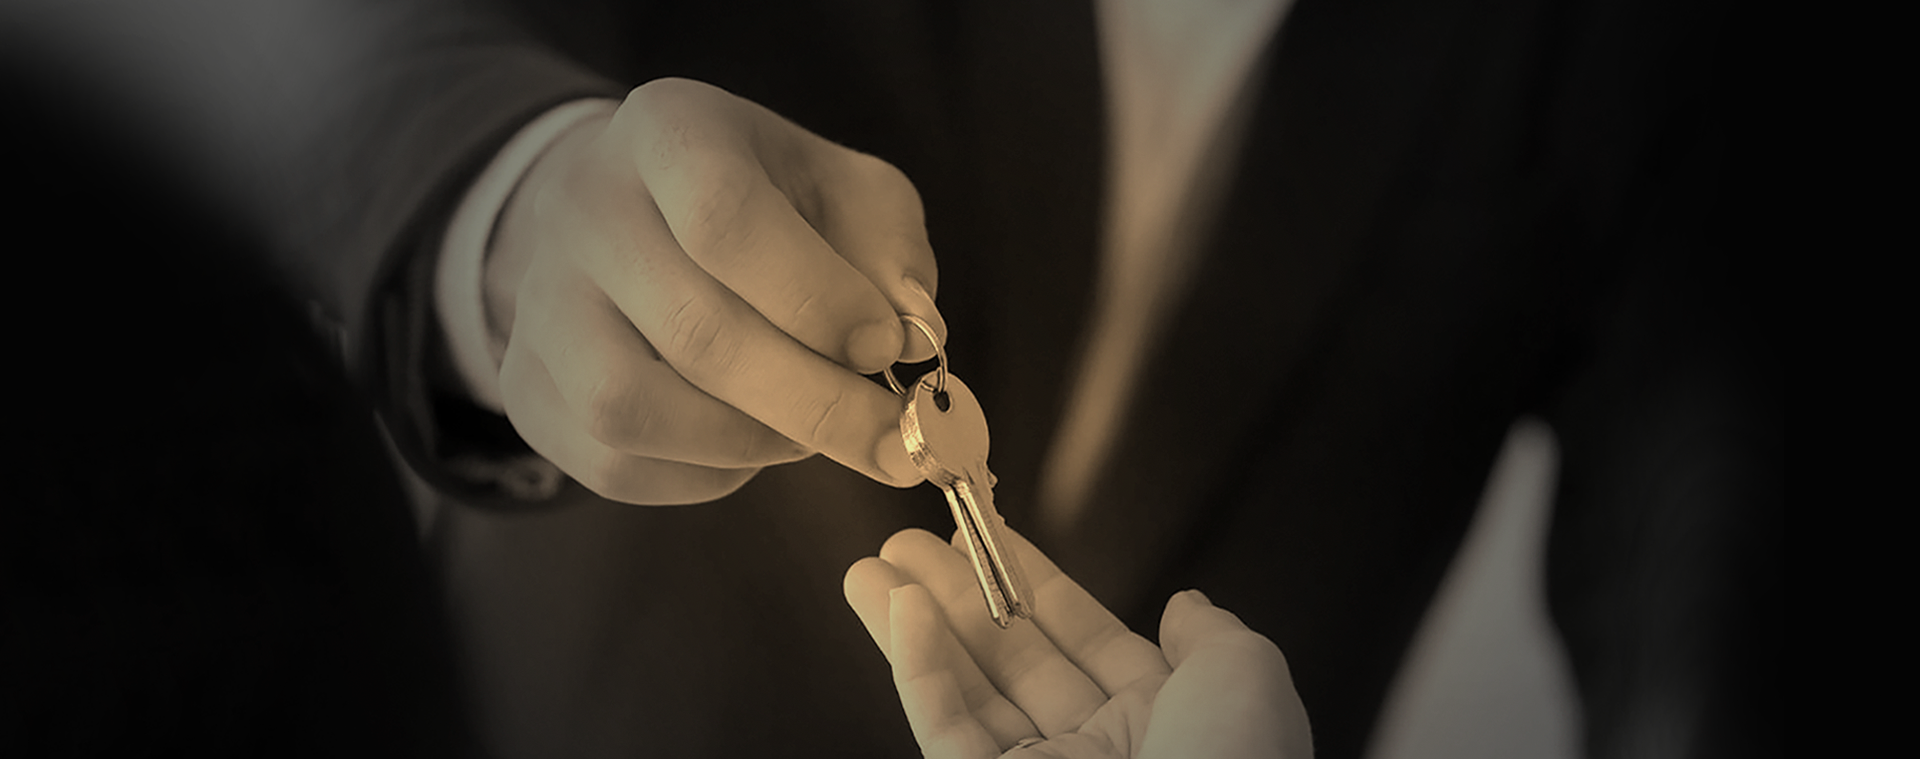 Man in suit handing building keys to another person